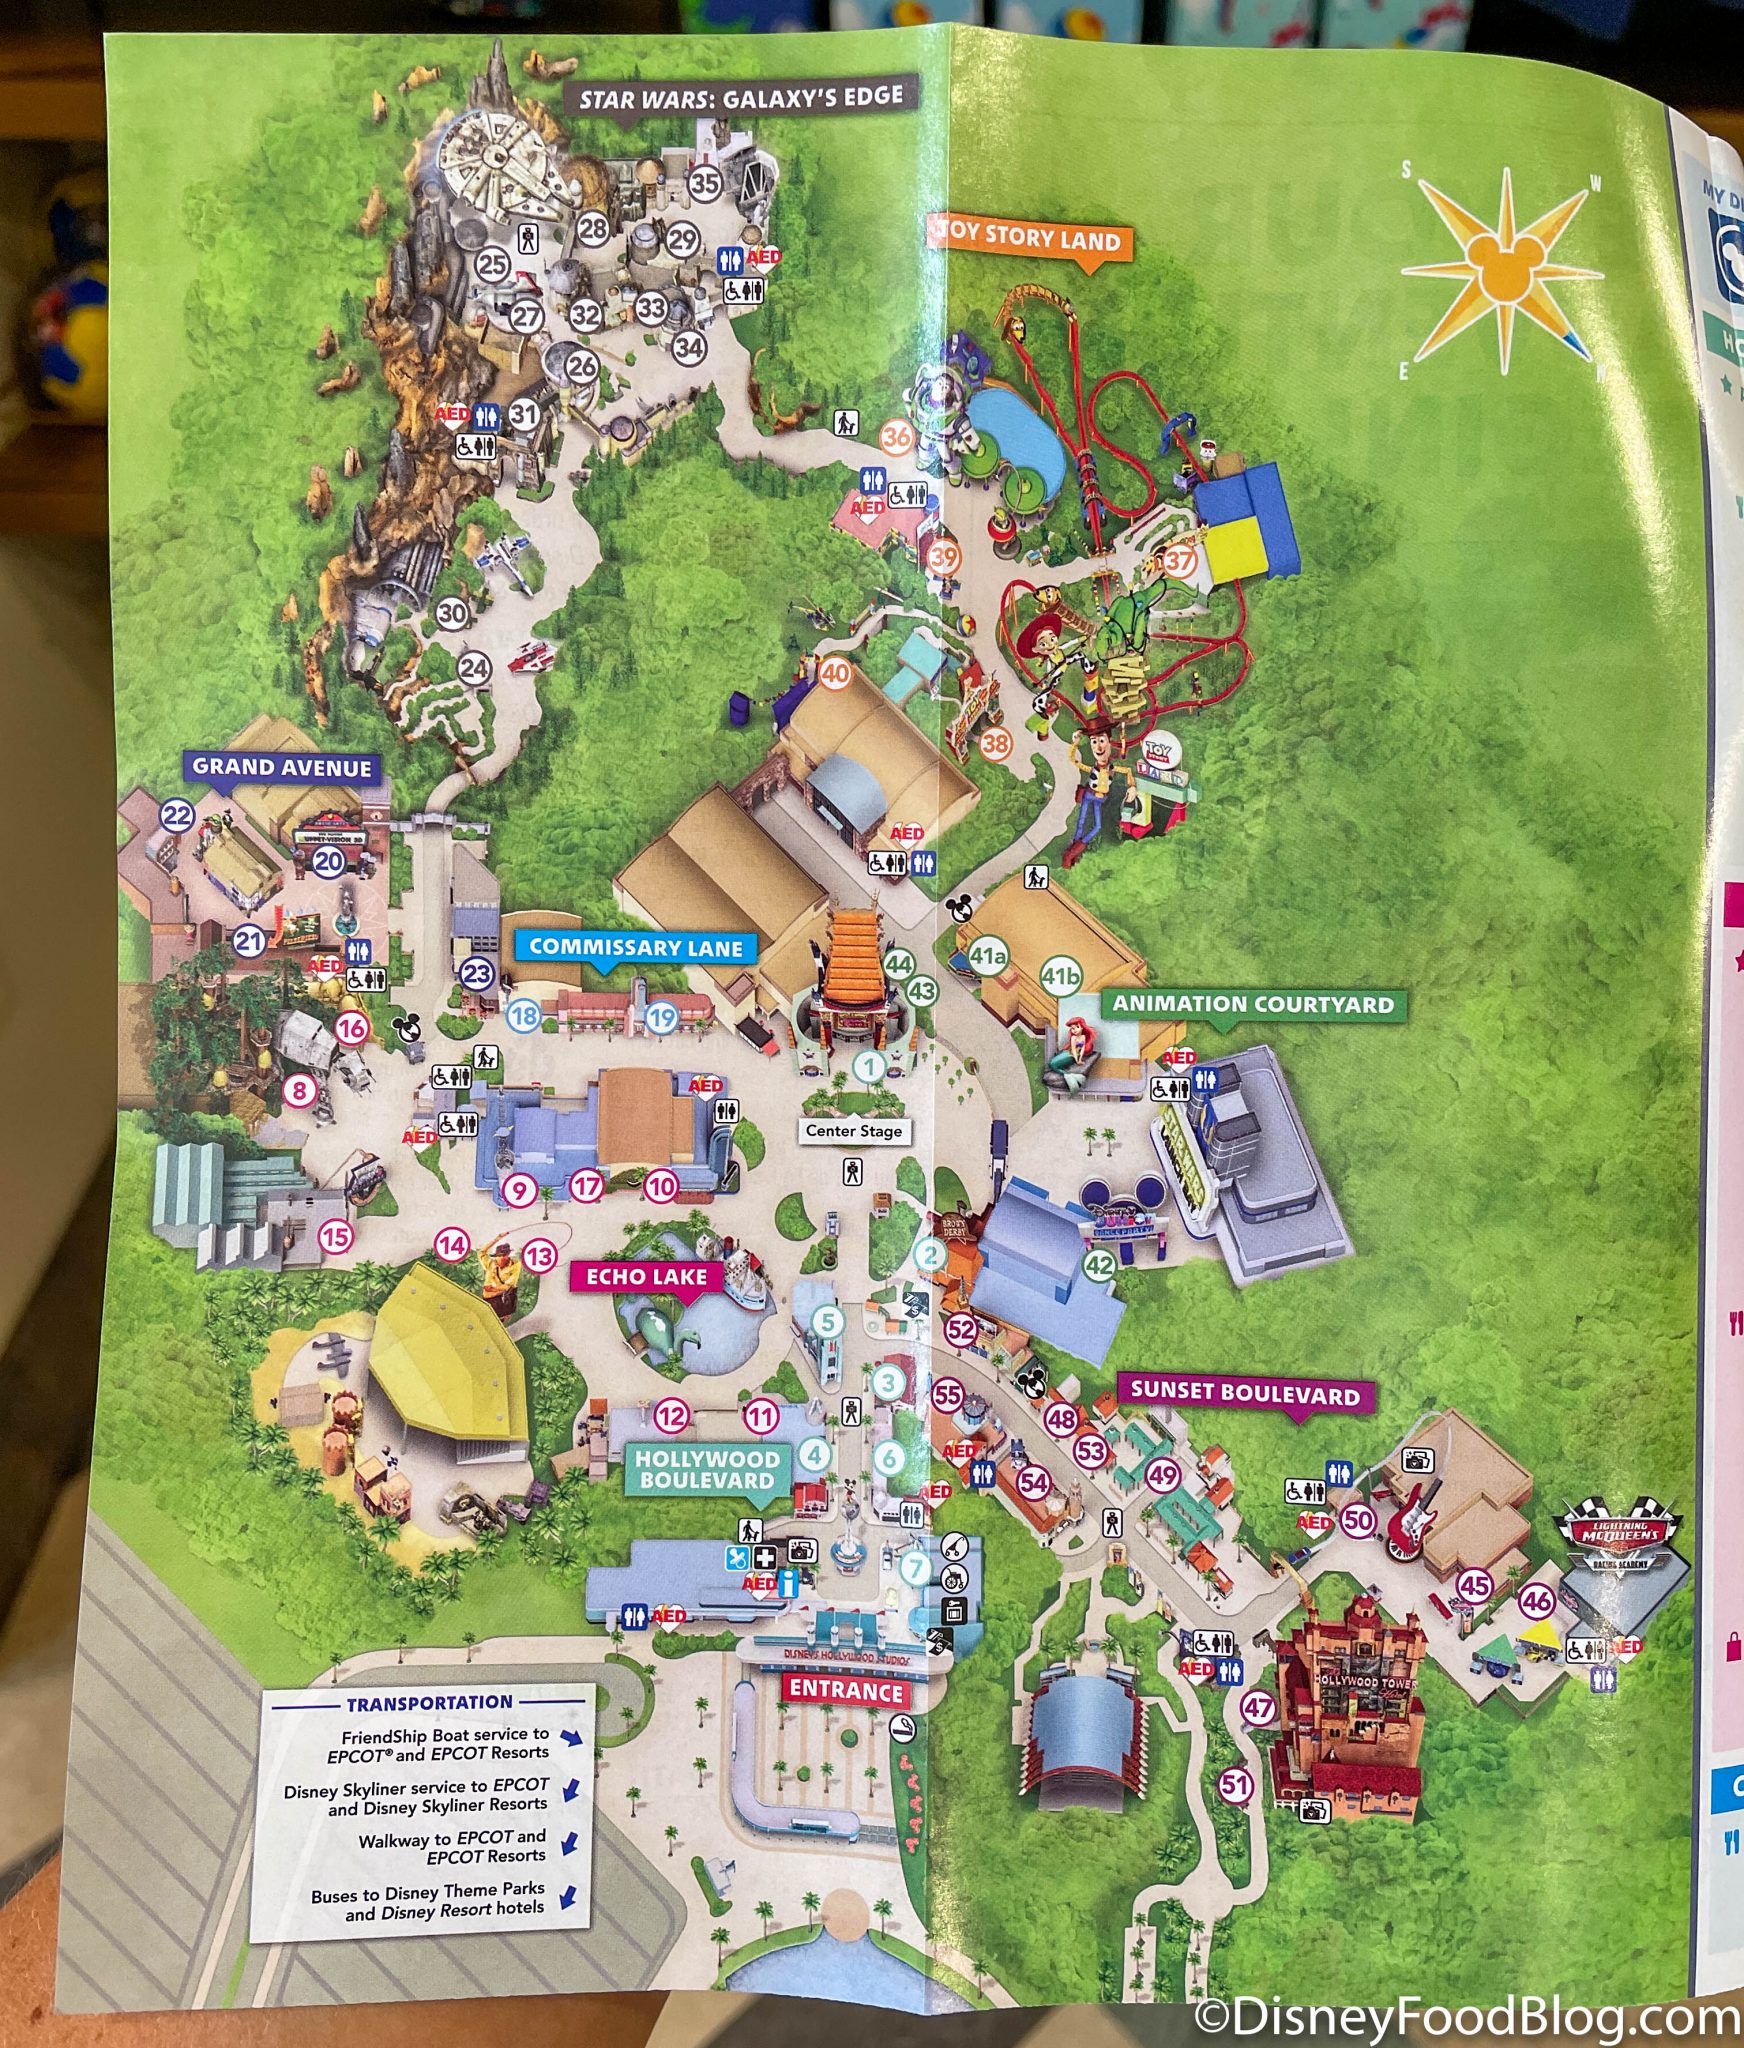 Disney's Hollywood Studios Gets a New Map With a BIG Change! the